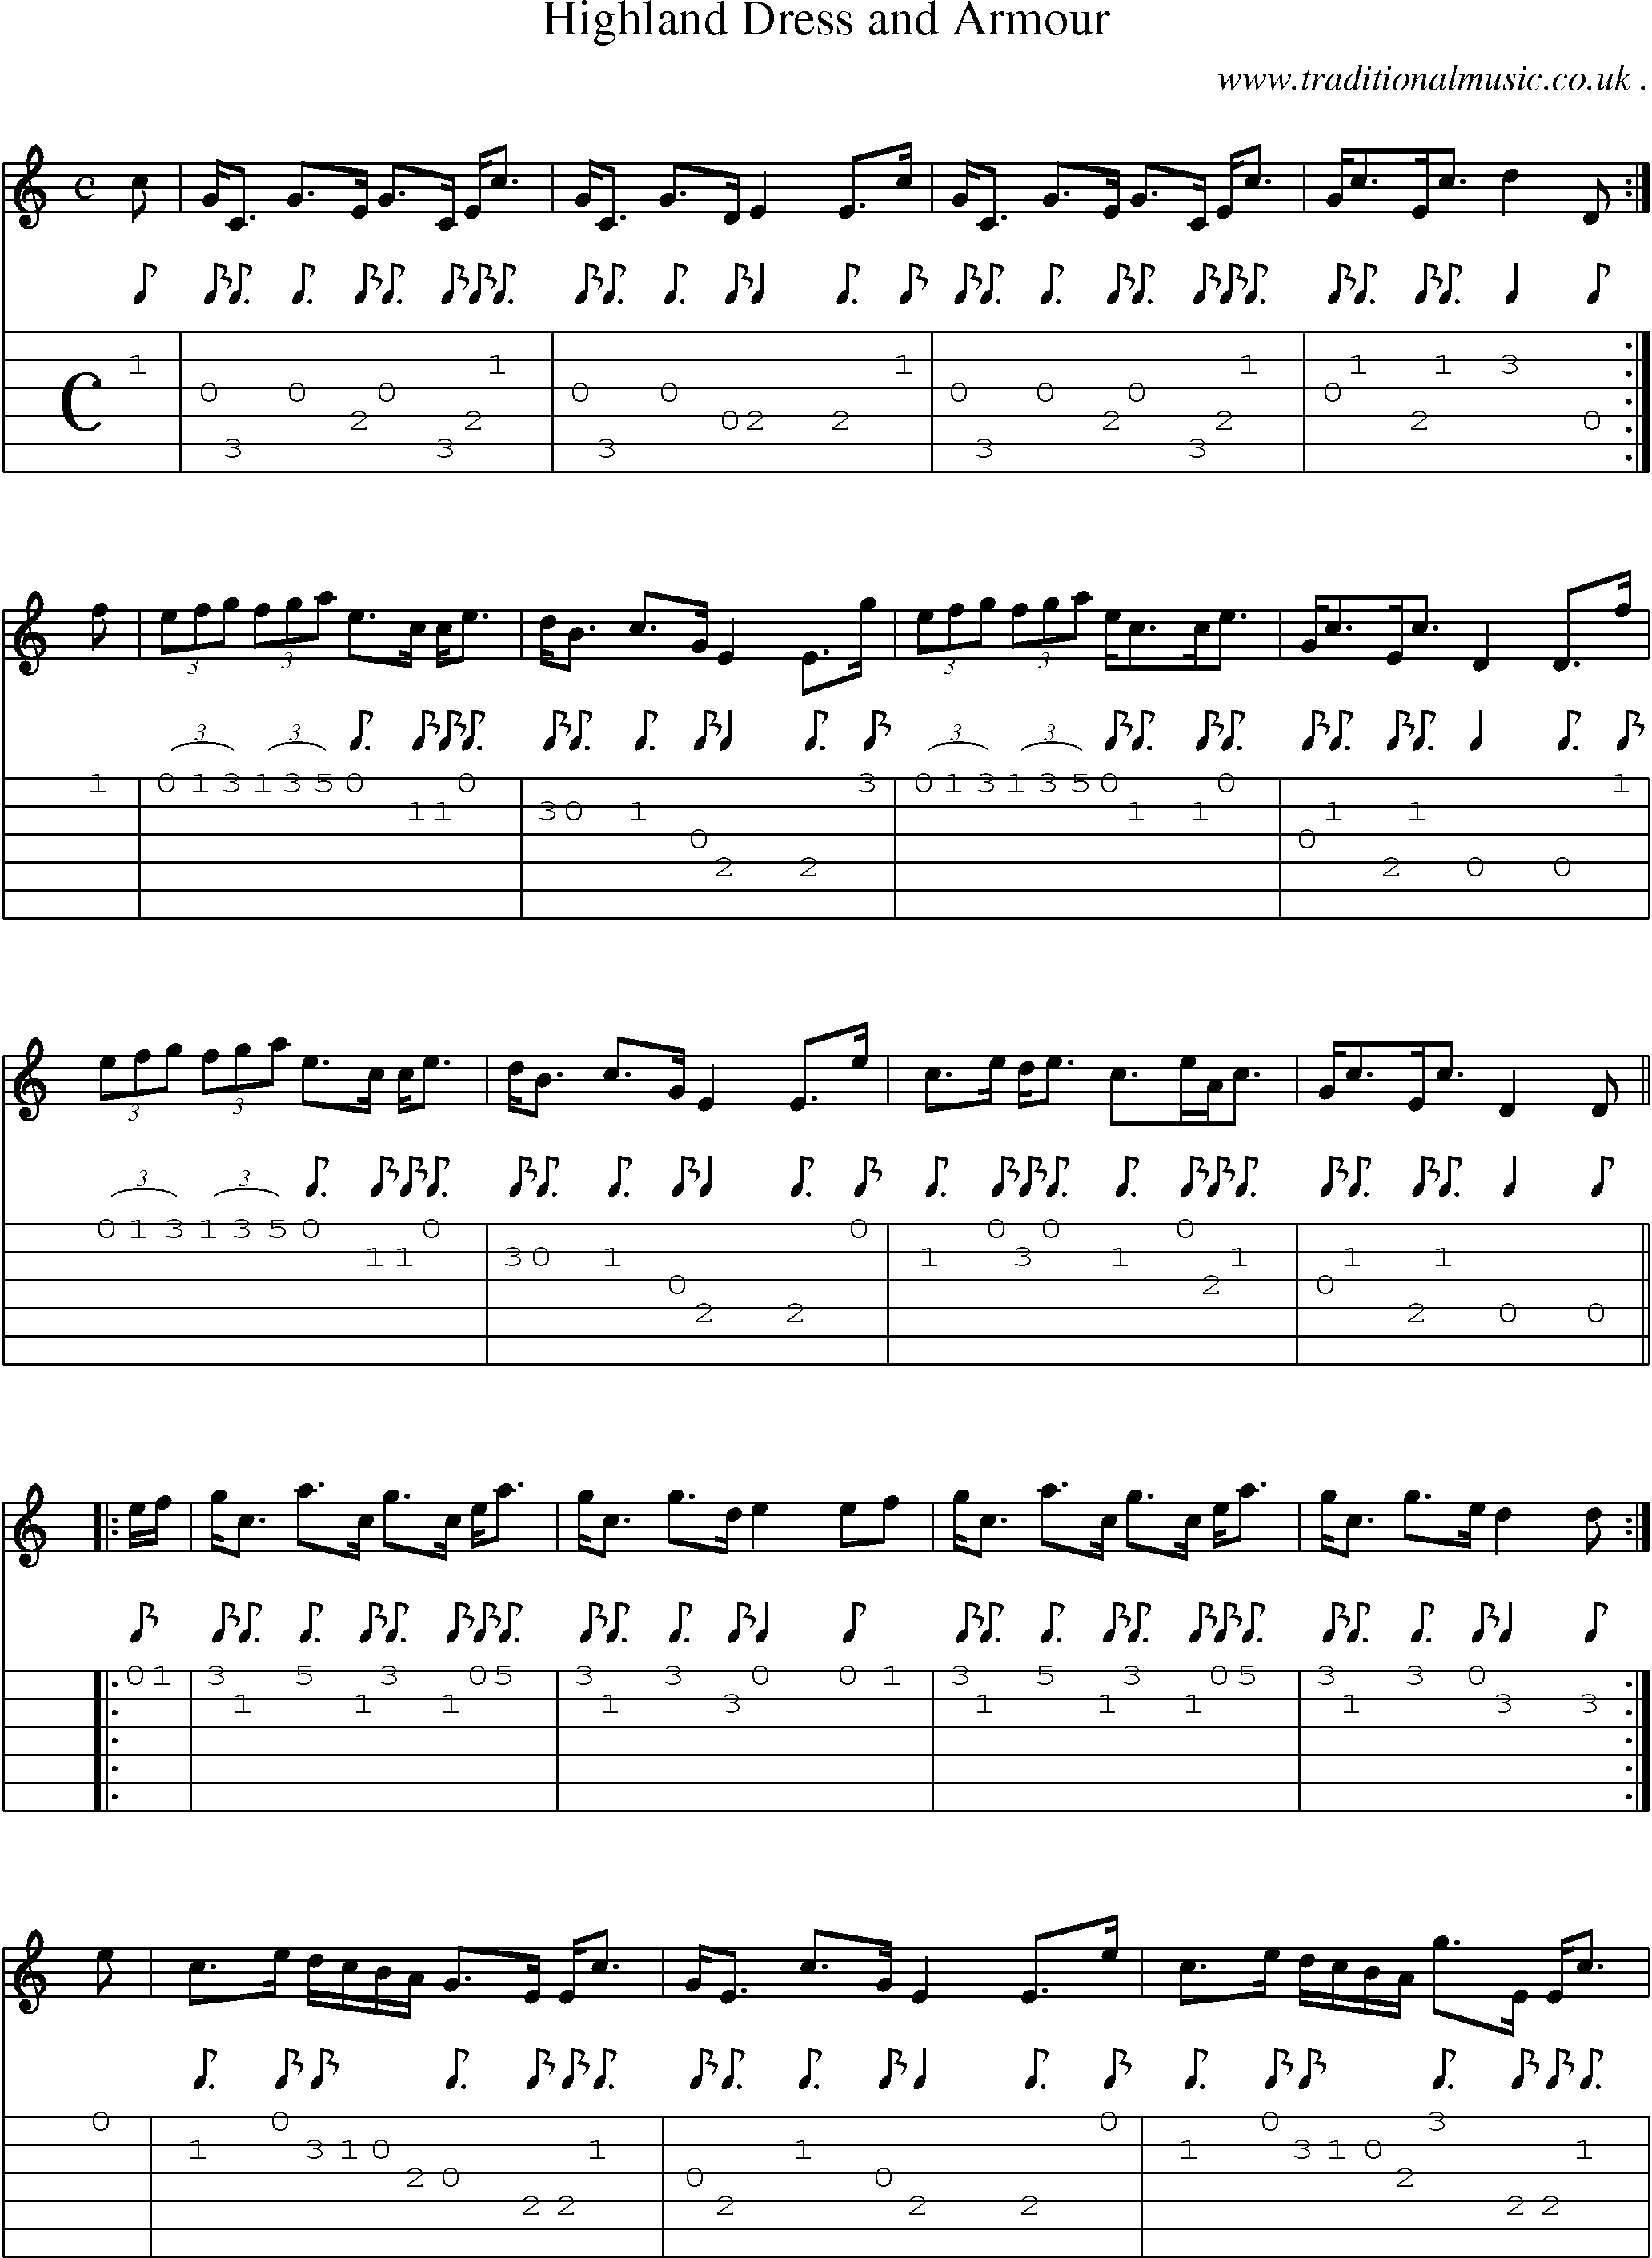 Sheet-music  score, Chords and Guitar Tabs for Highland Dress And Armour